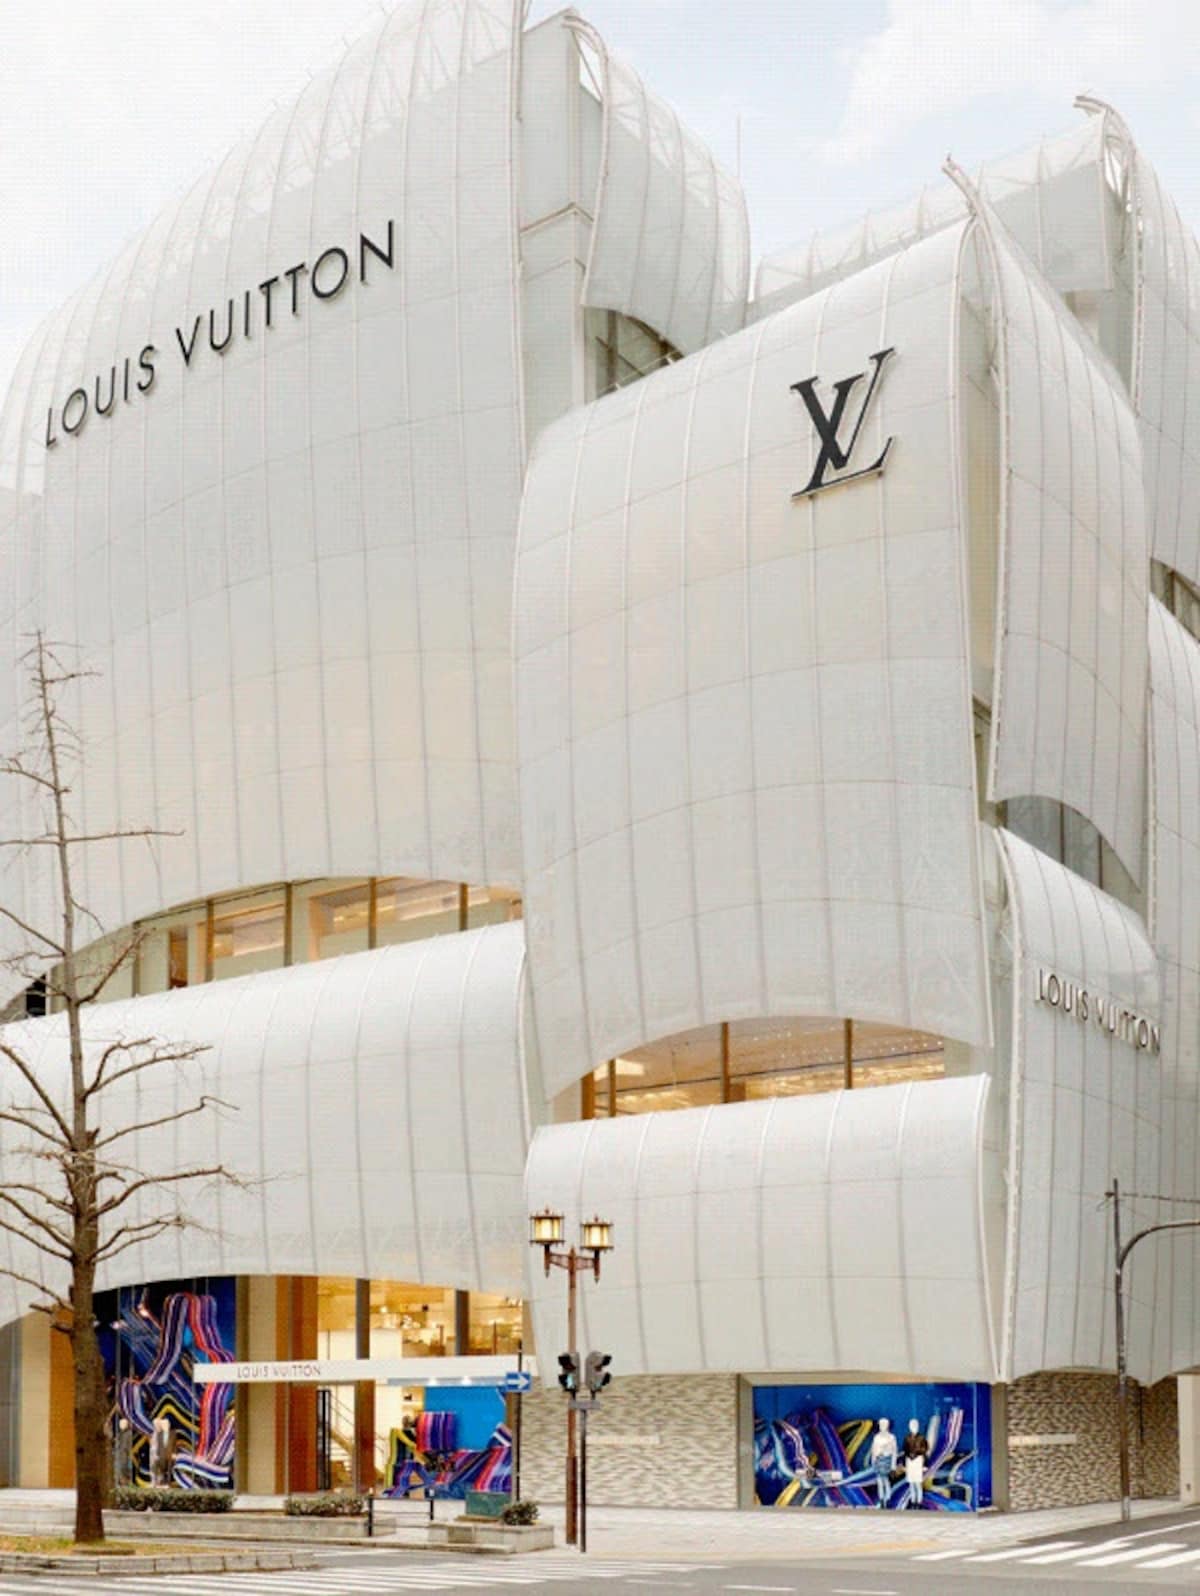 NorthGlass creates “sailing ship” for Louis Vuitton in Japan